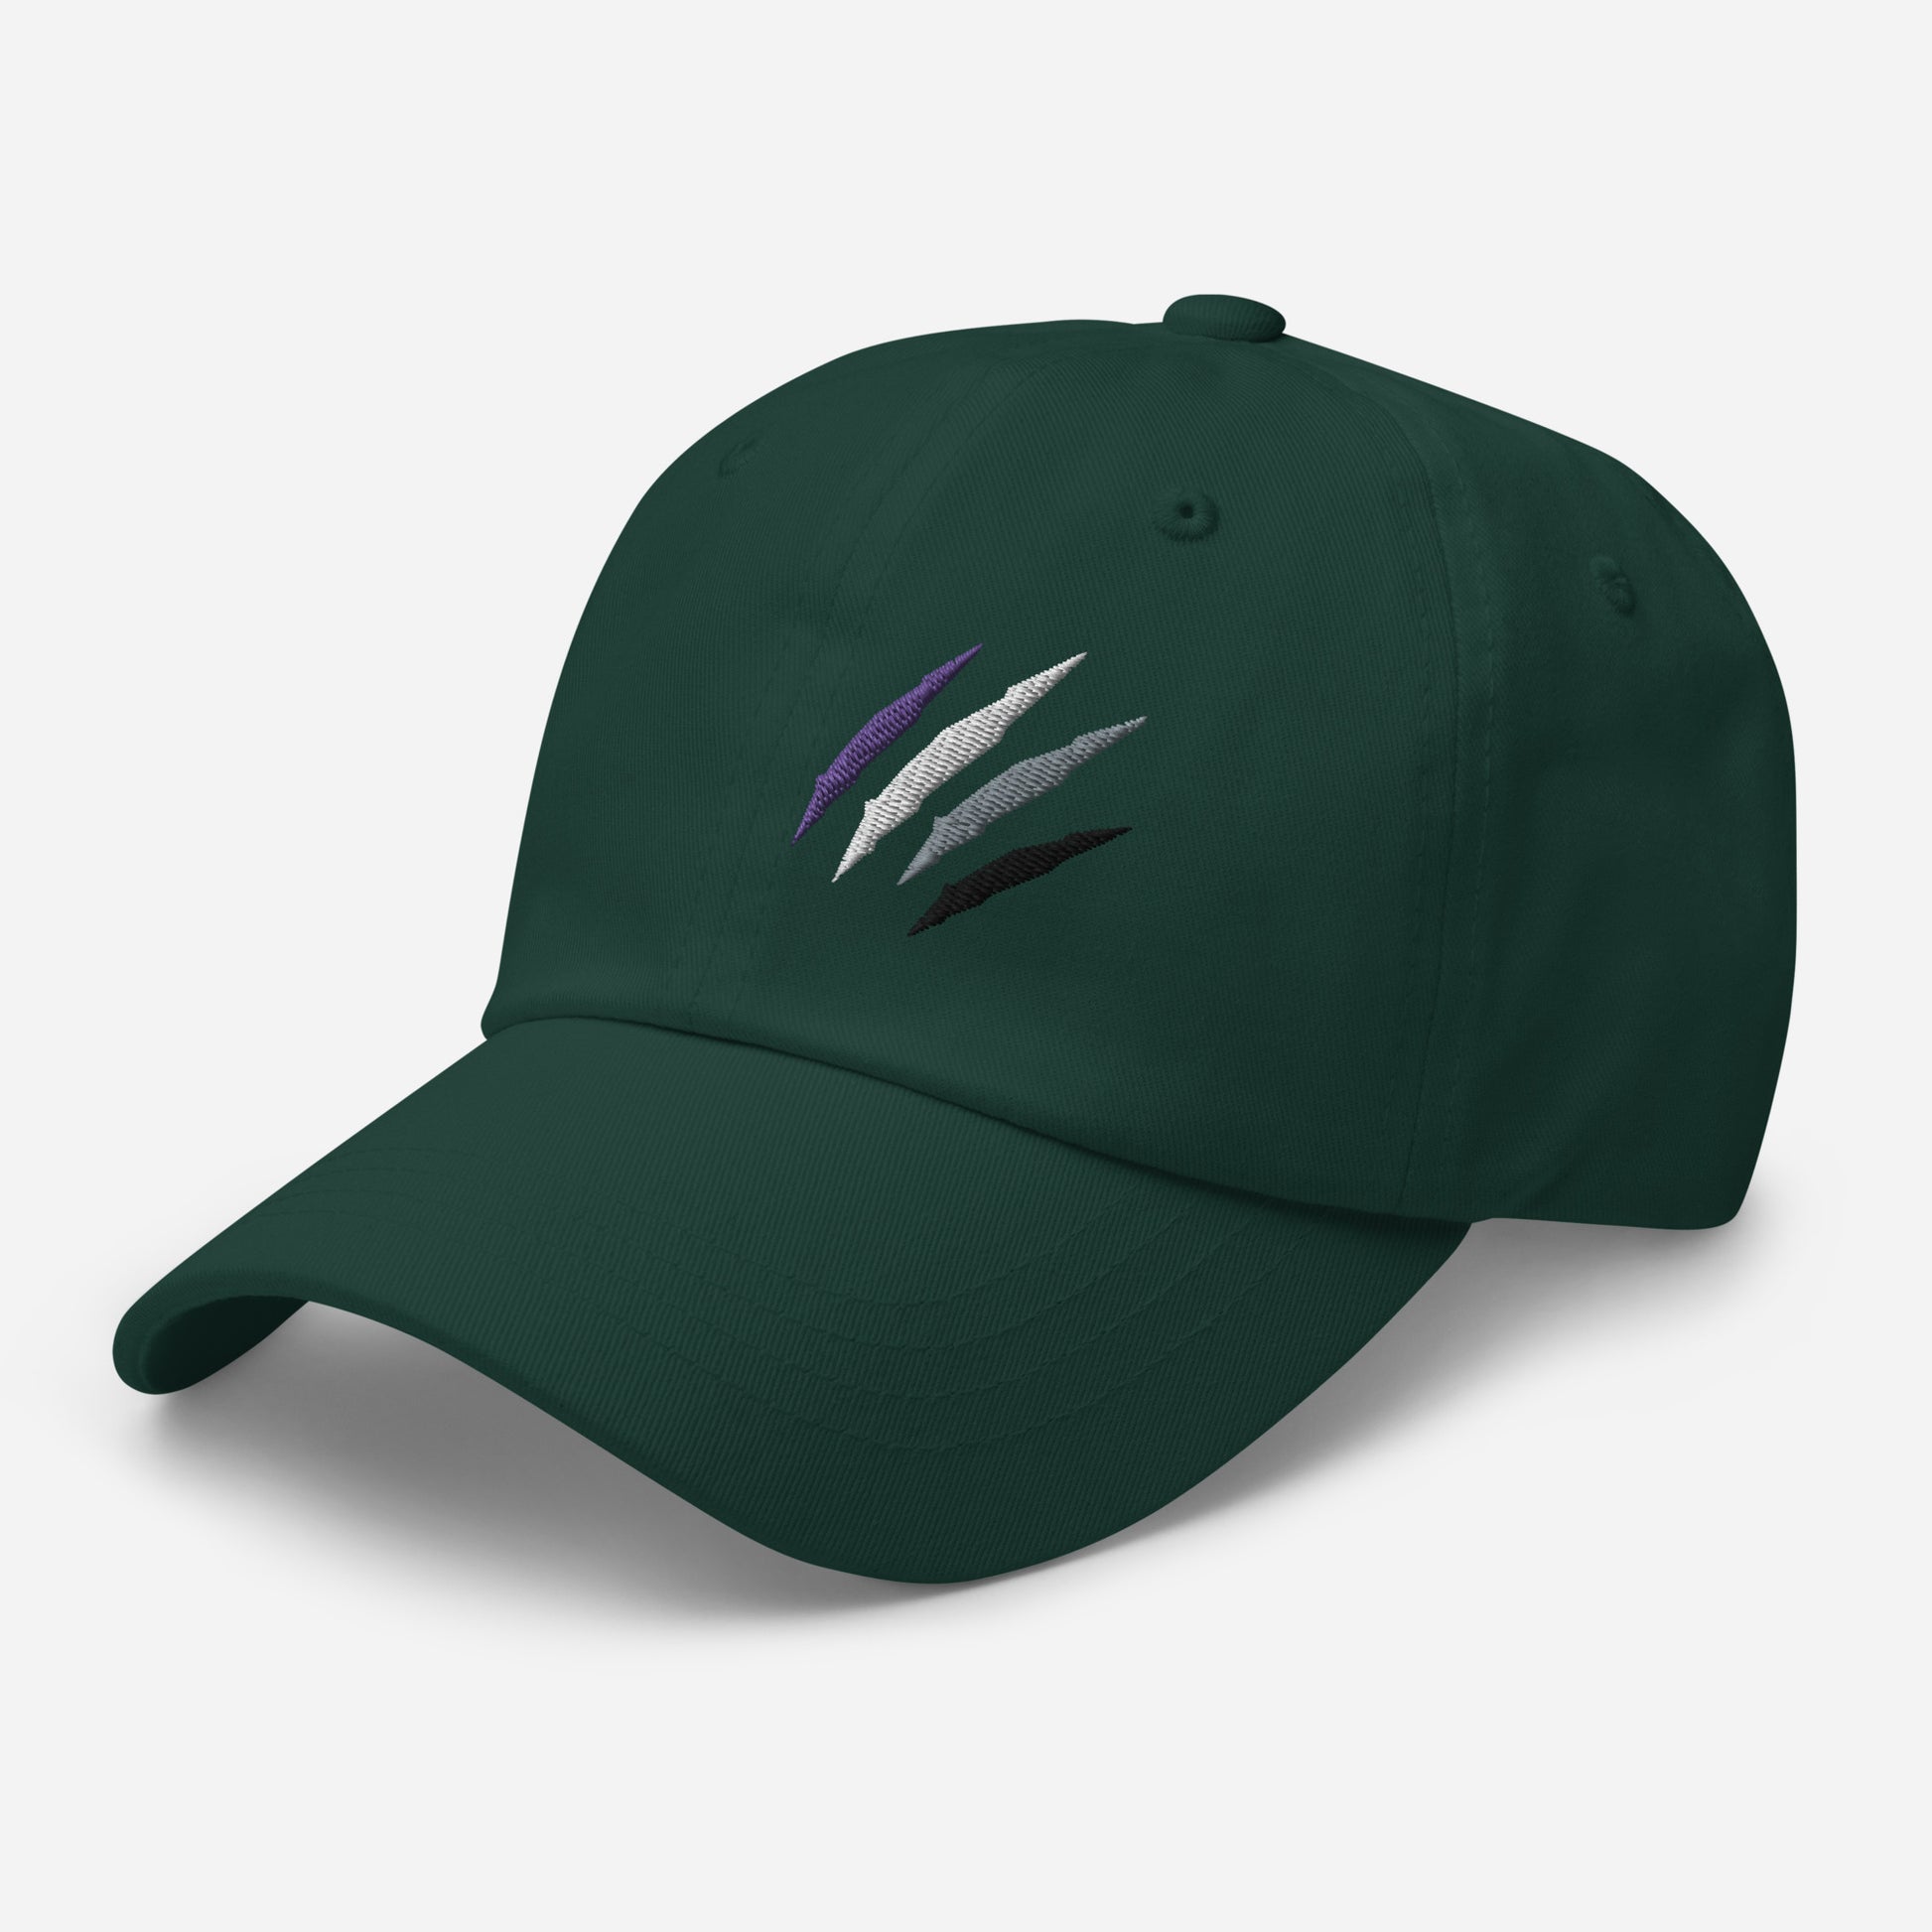 Baseball hat featuring asexual pride scratch mark embroidery in spruce with a low profile, adjustable strap.